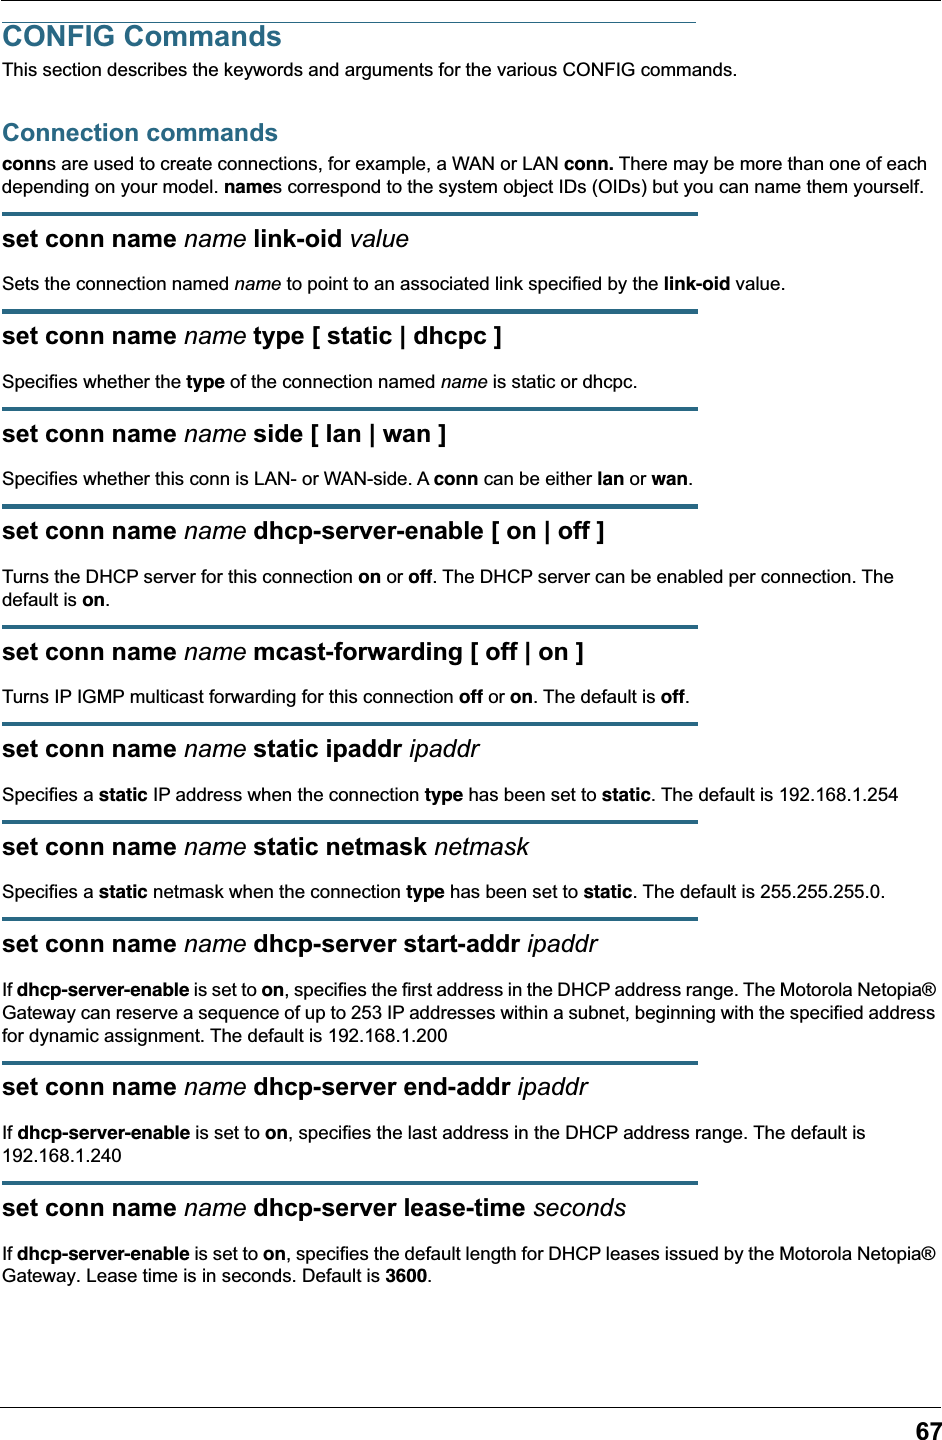 67CONFIG CommandsThis section describes the keywords and arguments for the various CONFIG commands.Connection commandsconns are used to create connections, for example, a WAN or LAN conn. There may be more than one of each depending on your model. names correspond to the system object IDs (OIDs) but you can name them yourself.set conn name name link-oid valueSets the connection named name to point to an associated link specified by the link-oid value.set conn name name type [ static | dhcpc ]Specifies whether the type of the connection named name is static or dhcpc.set conn name name side [ lan | wan ]Specifies whether this conn is LAN- or WAN-side. A conn can be either lan or wan.set conn name name dhcp-server-enable [ on | off ]Turns the DHCP server for this connection on or off. The DHCP server can be enabled per connection. The default is on.set conn name name mcast-forwarding [ off | on ]Turns IP IGMP multicast forwarding for this connection off or on. The default is off.set conn name name static ipaddr ipaddrSpecifies a static IP address when the connection type has been set to static. The default is 192.168.1.254set conn name name static netmask netmaskSpecifies a static netmask when the connection type has been set to static. The default is 255.255.255.0.set conn name name dhcp-server start-addr ipaddrIf dhcp-server-enable is set to on, specifies the first address in the DHCP address range. The Motorola Netopia® Gateway can reserve a sequence of up to 253 IP addresses within a subnet, beginning with the specified address for dynamic assignment. The default is 192.168.1.200set conn name name dhcp-server end-addr ipaddrIf dhcp-server-enable is set to on, specifies the last address in the DHCP address range. The default is 192.168.1.240set conn name name dhcp-server lease-time secondsIf dhcp-server-enable is set to on, specifies the default length for DHCP leases issued by the Motorola Netopia® Gateway. Lease time is in seconds. Default is 3600.